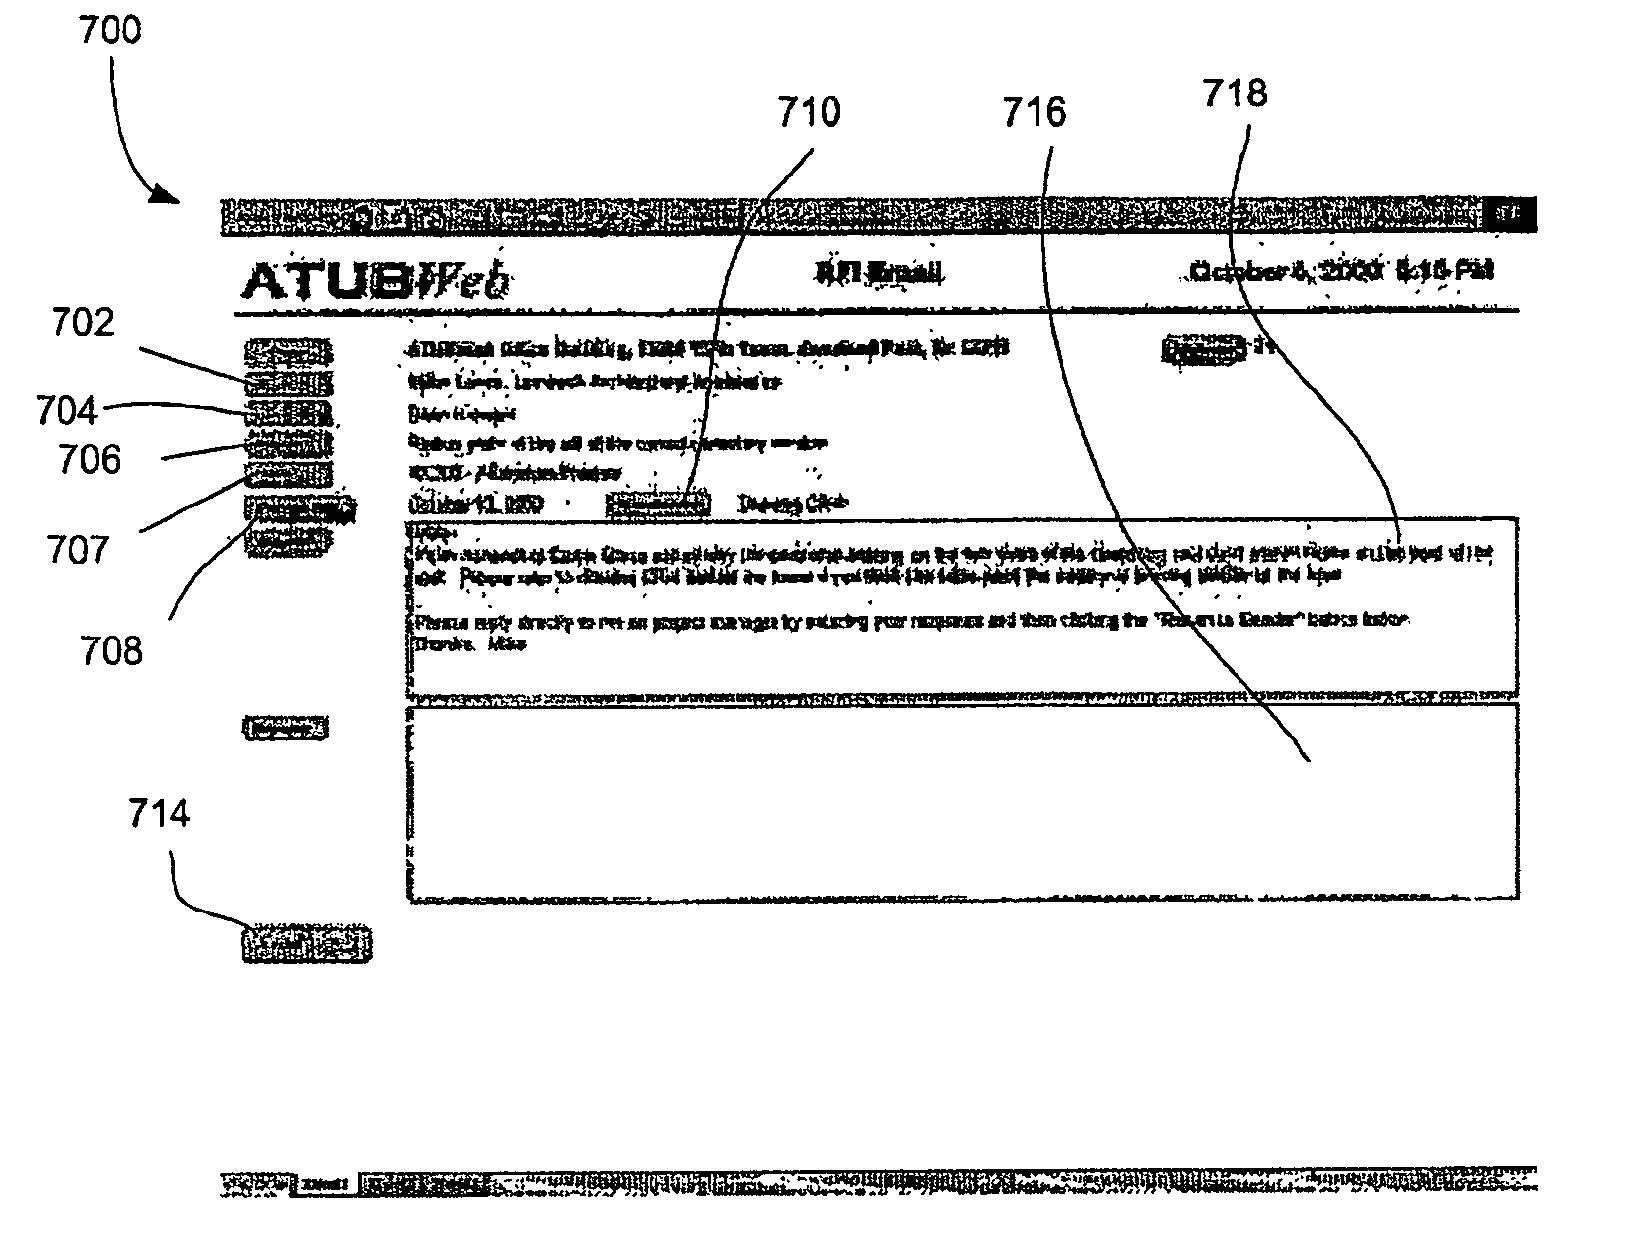 System, method, and article of manufacture for scheduling and document management integration